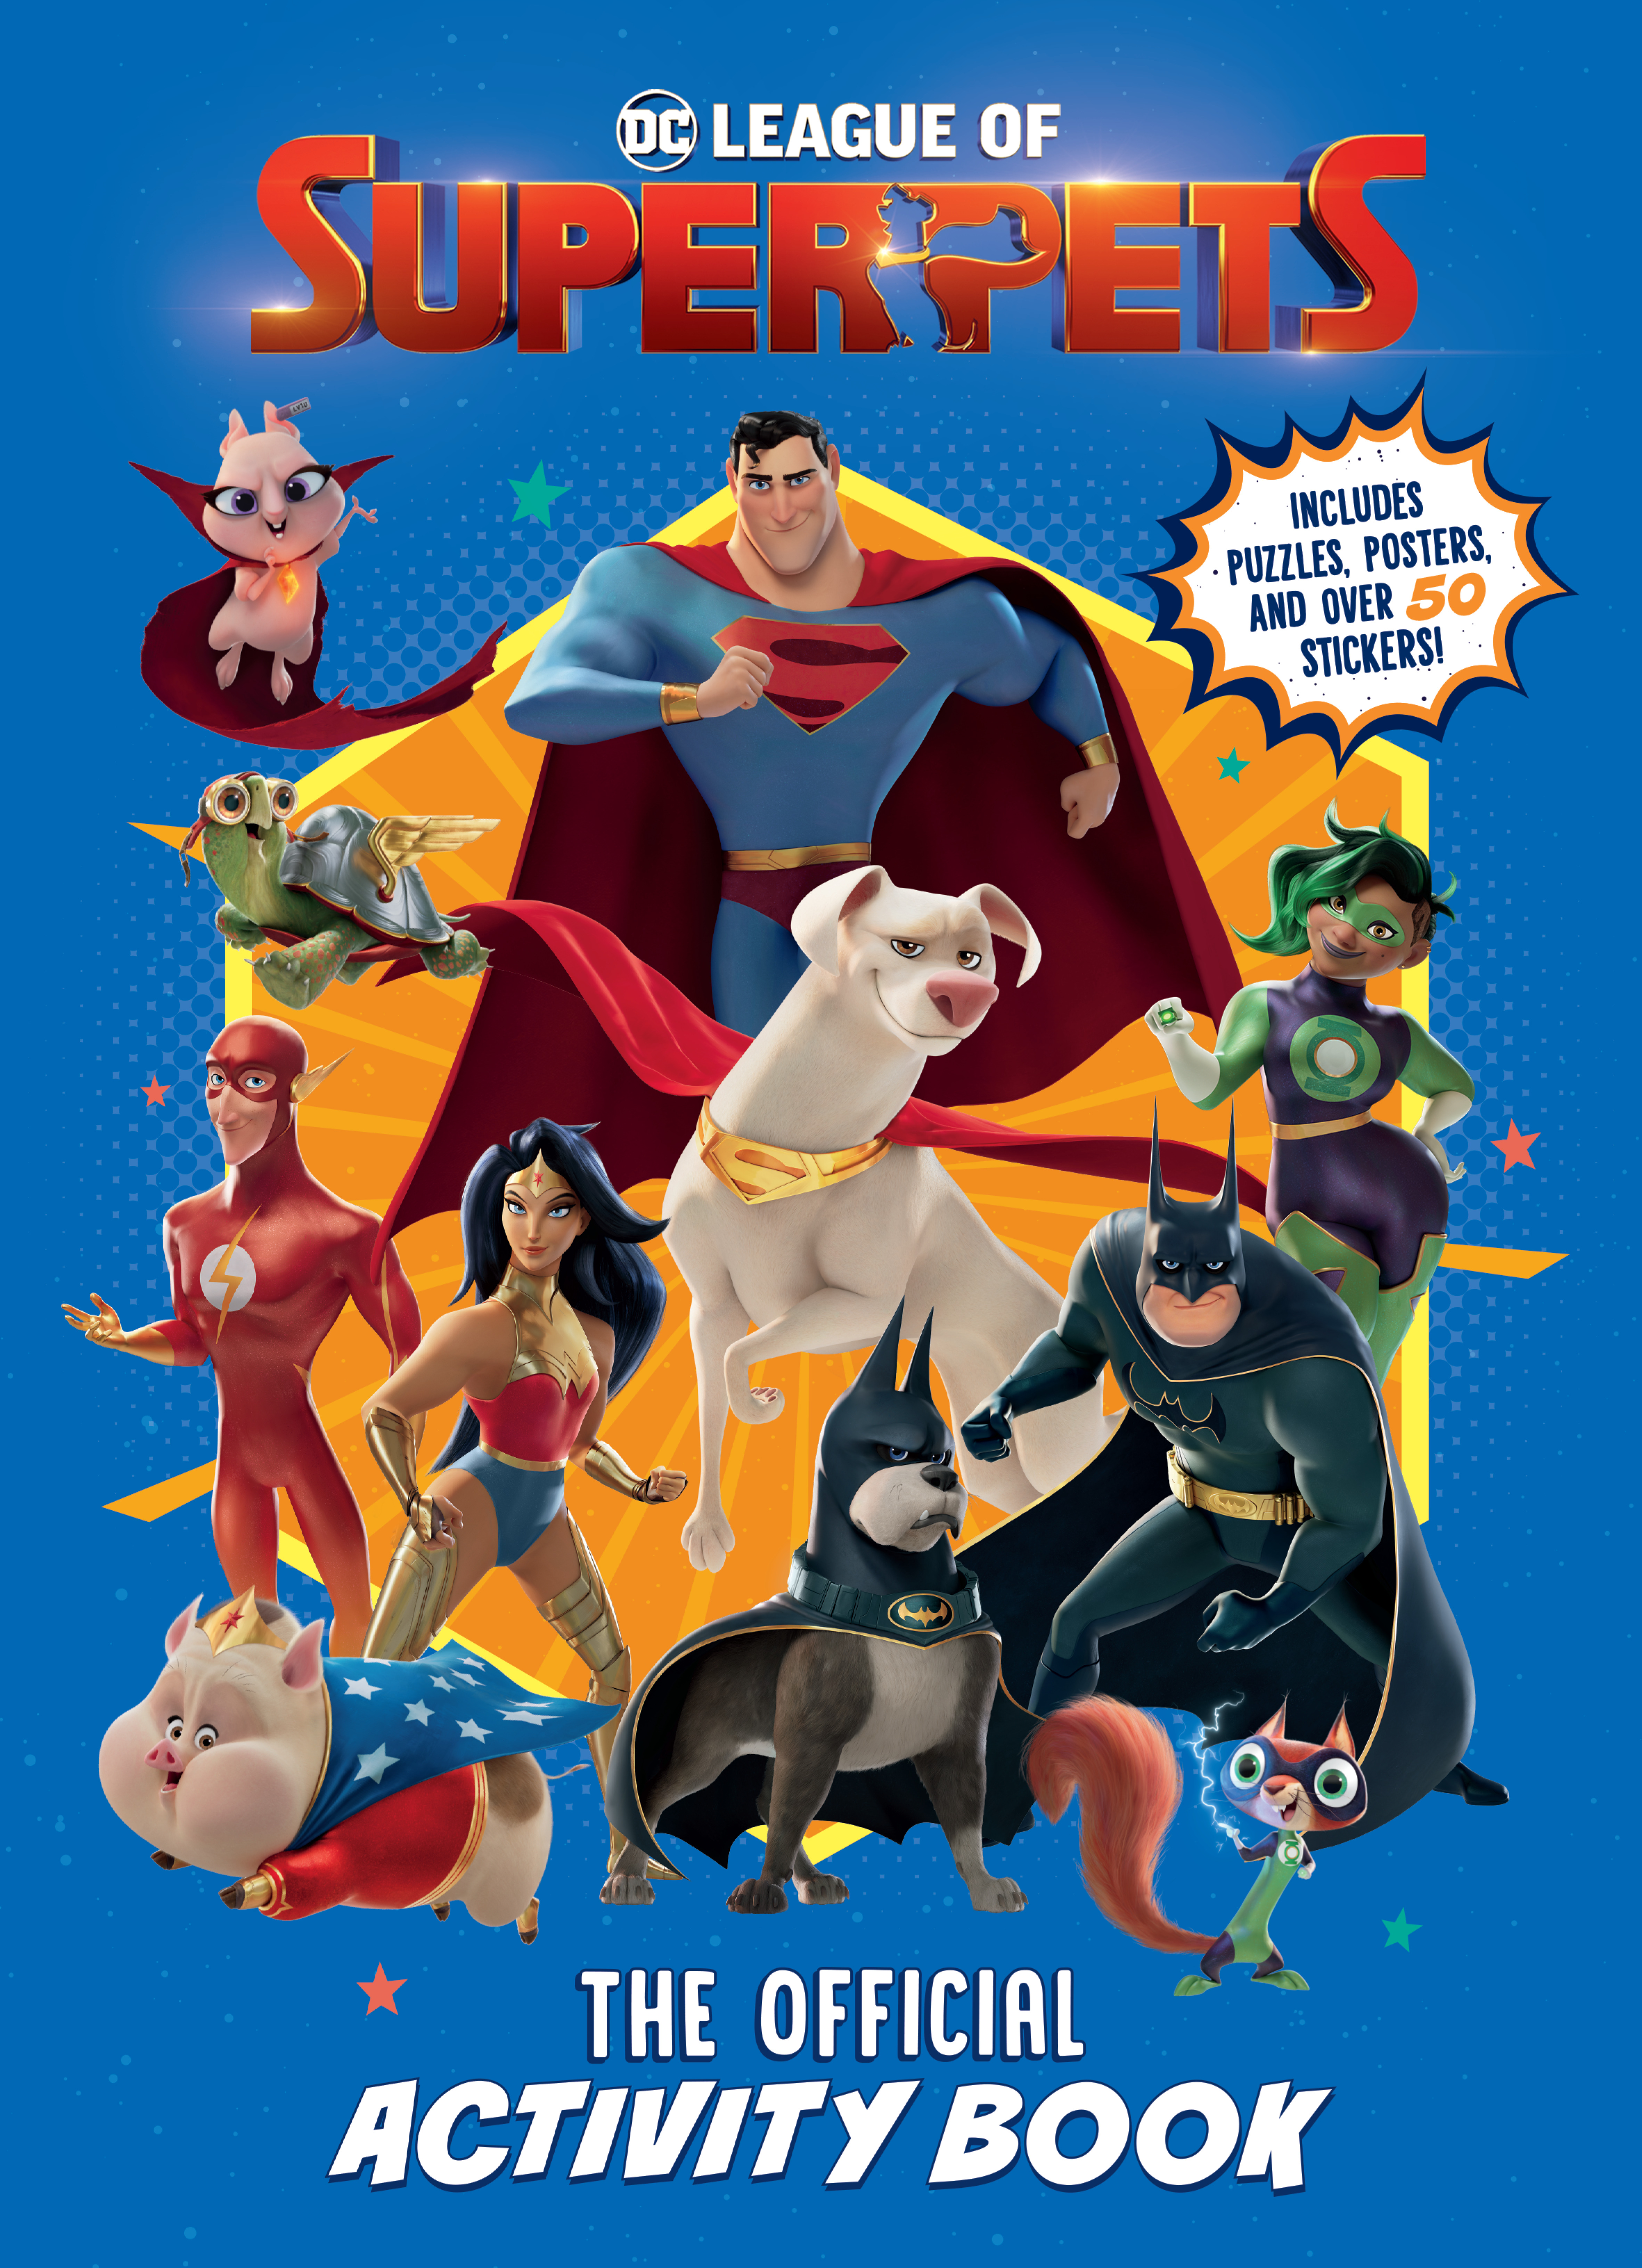 DC League of Super-Pets - The Official Activity Book : Includes puzzles, posters, and over 30 stickers! | Activity book